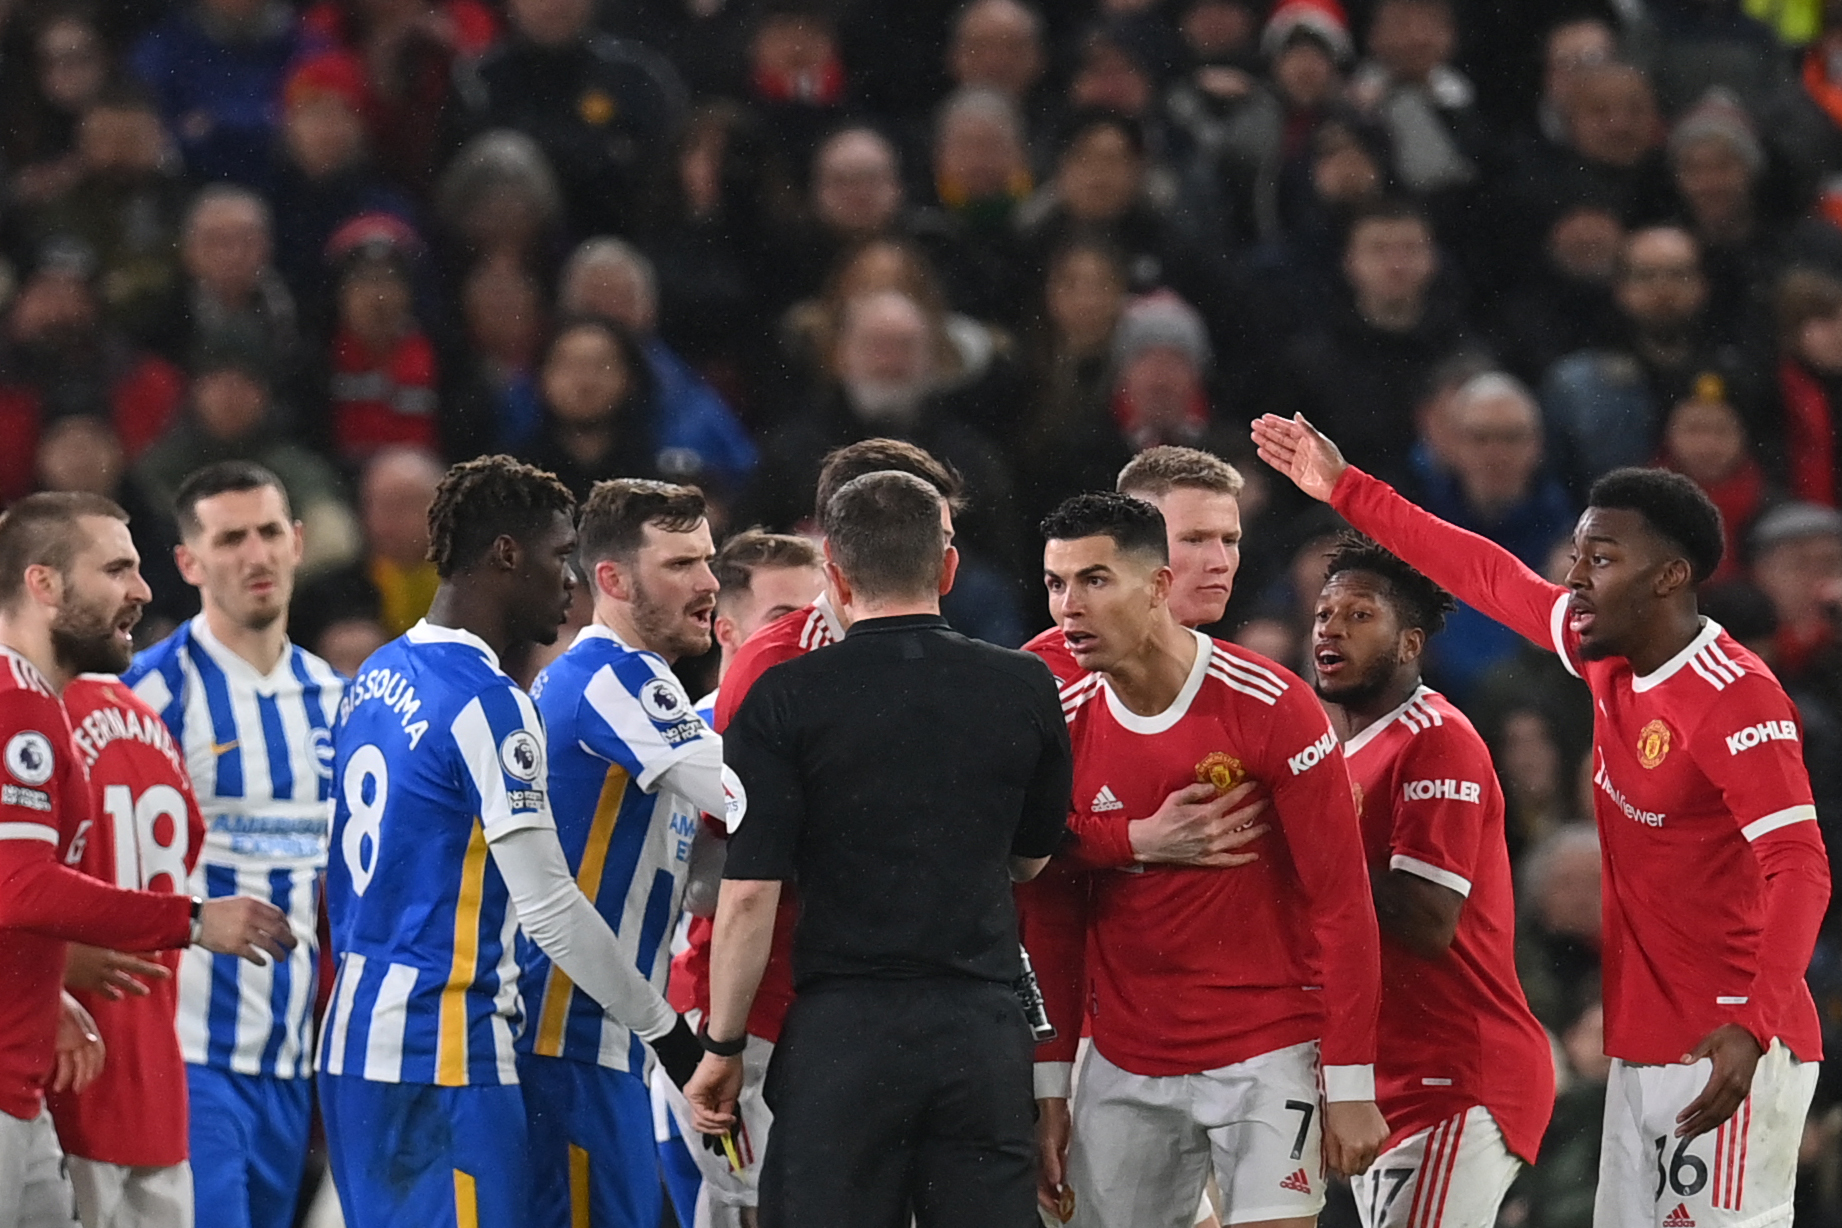 Man United charged by FA for failing to control players